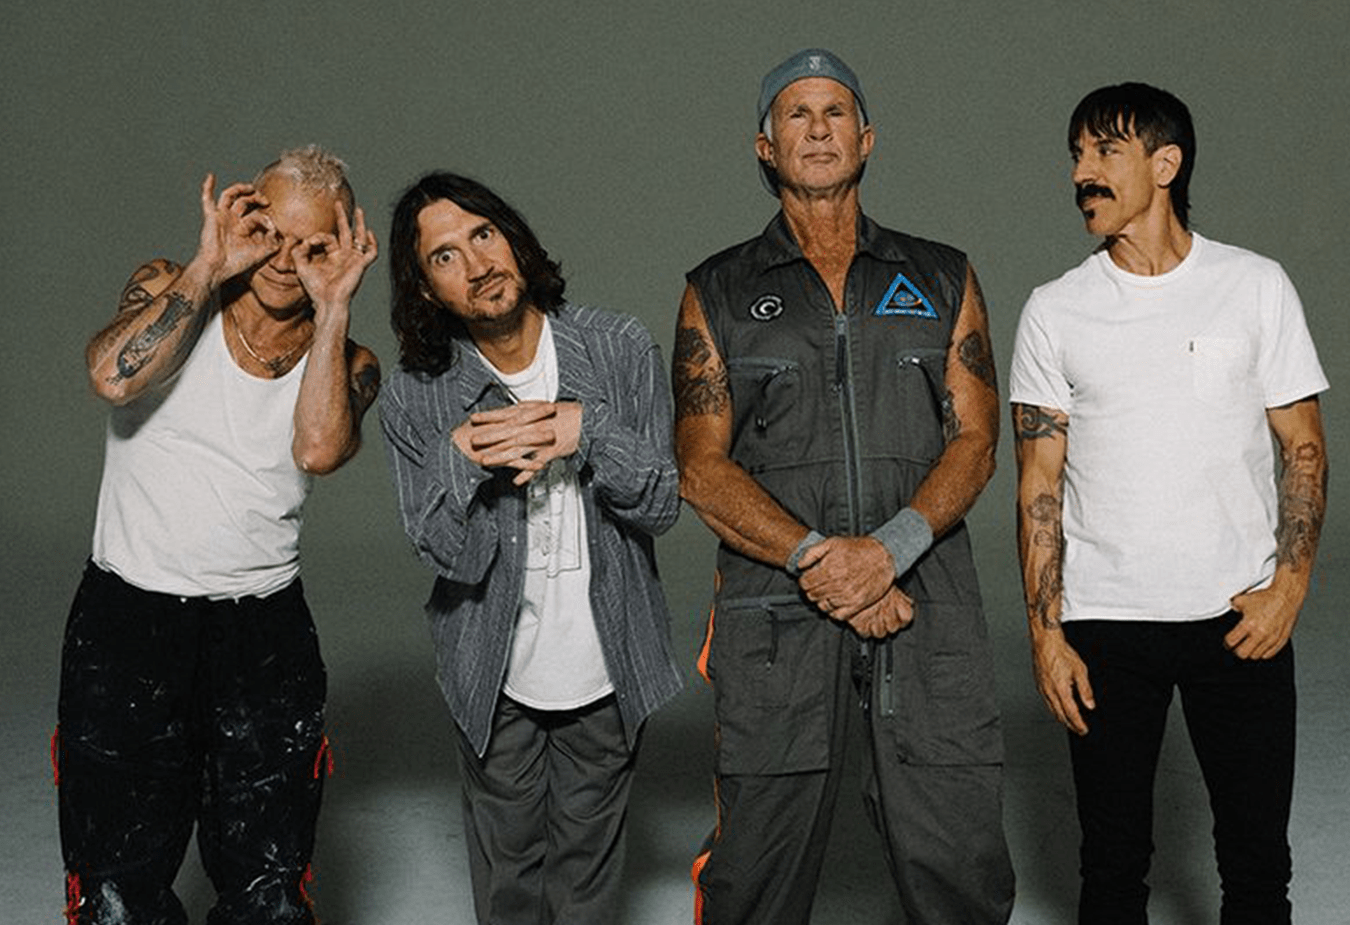 RHCP’s Black Summer Follows Up the Upcoming “Unlimited Love”